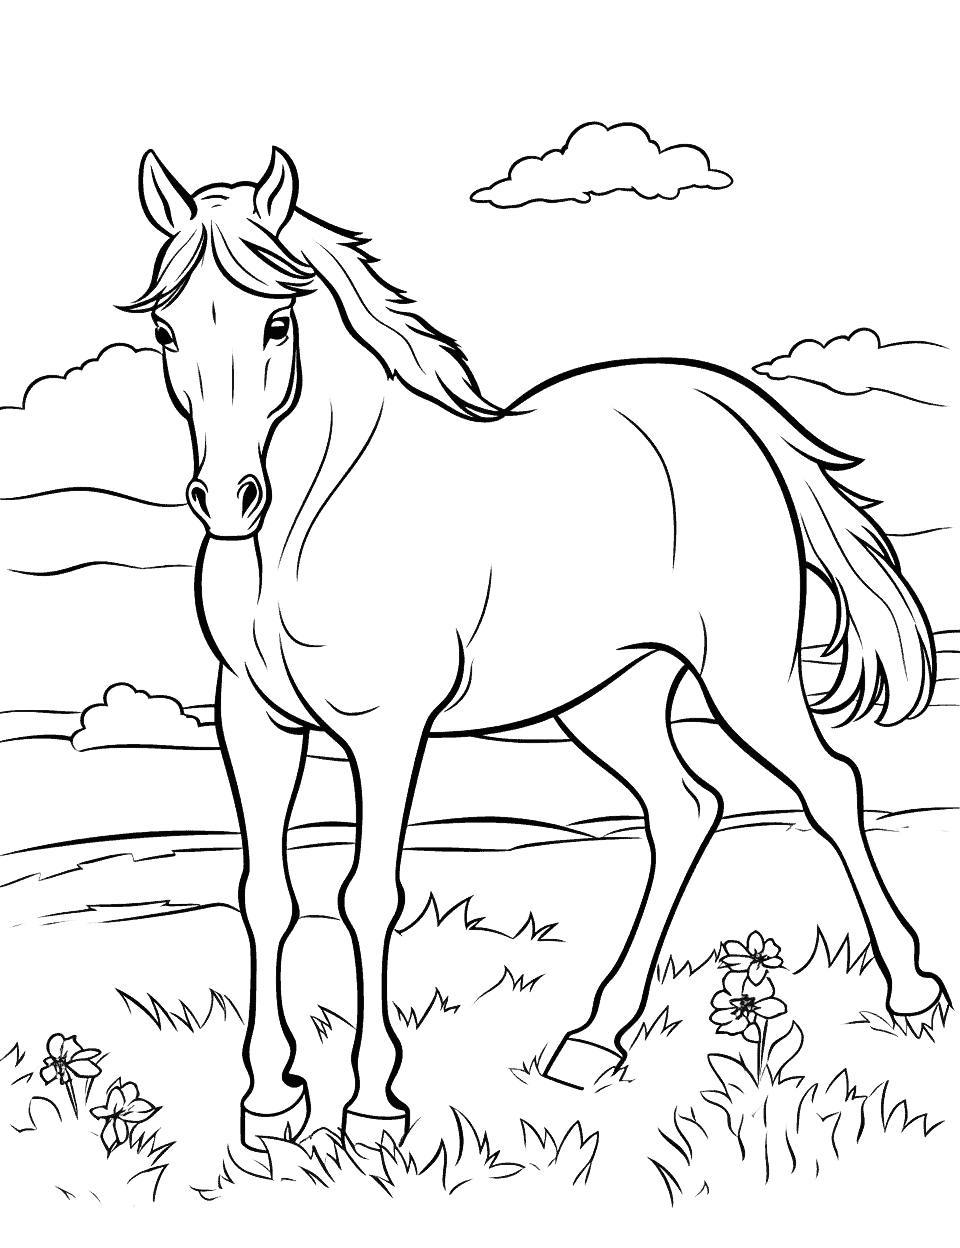 Paint Horse in the Pasture Coloring Page - A Paint horse enjoying a sunny day in the pasture.